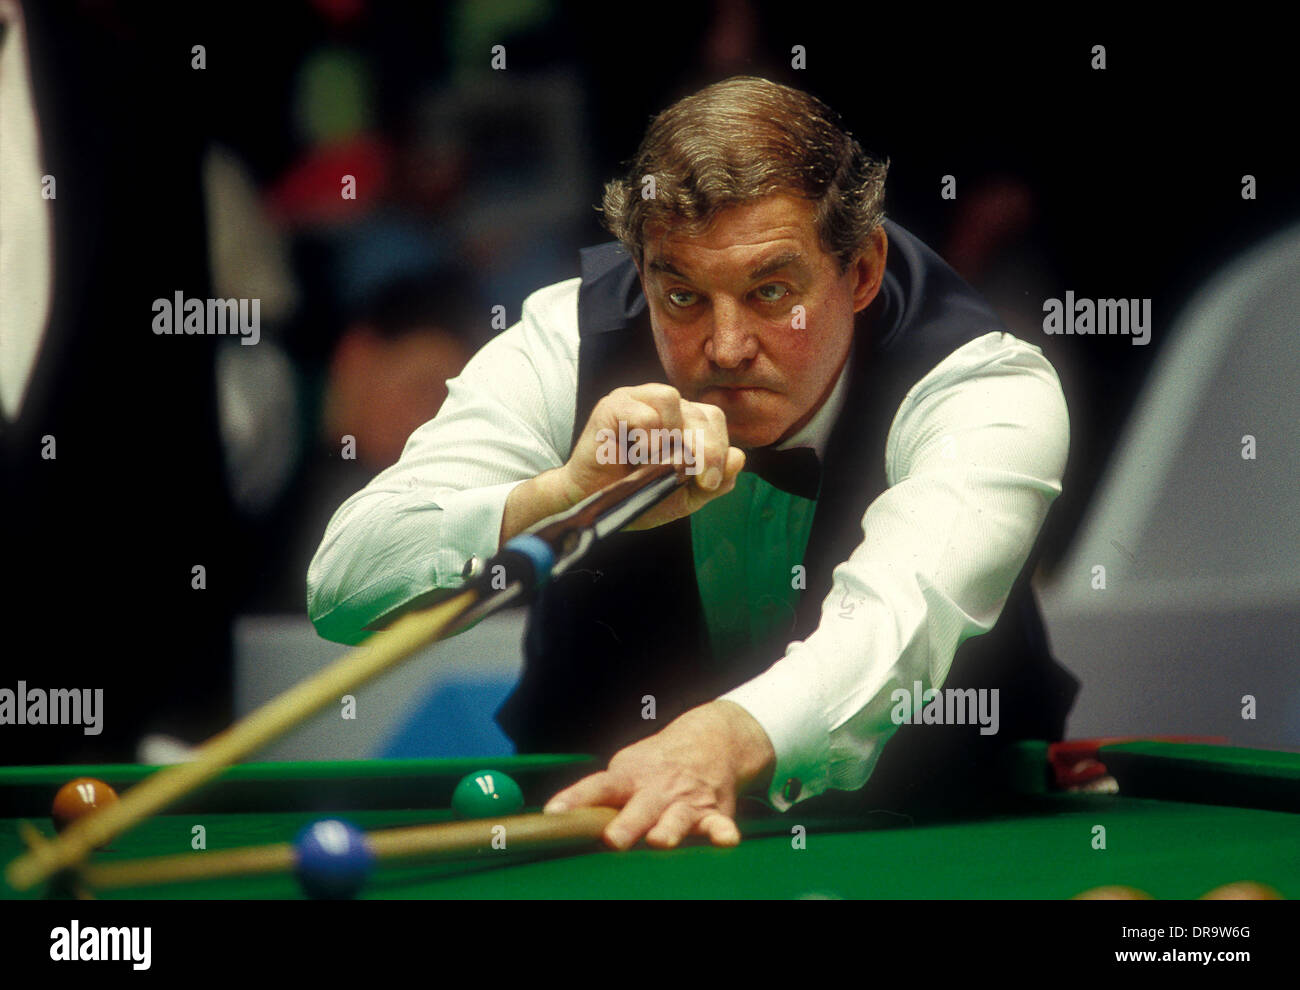 Australian eddie Charlton at The Embassy World Snooker Tournament, Crucible  Theatre Sheffield in the early 1980's Stock Photo - Alamy